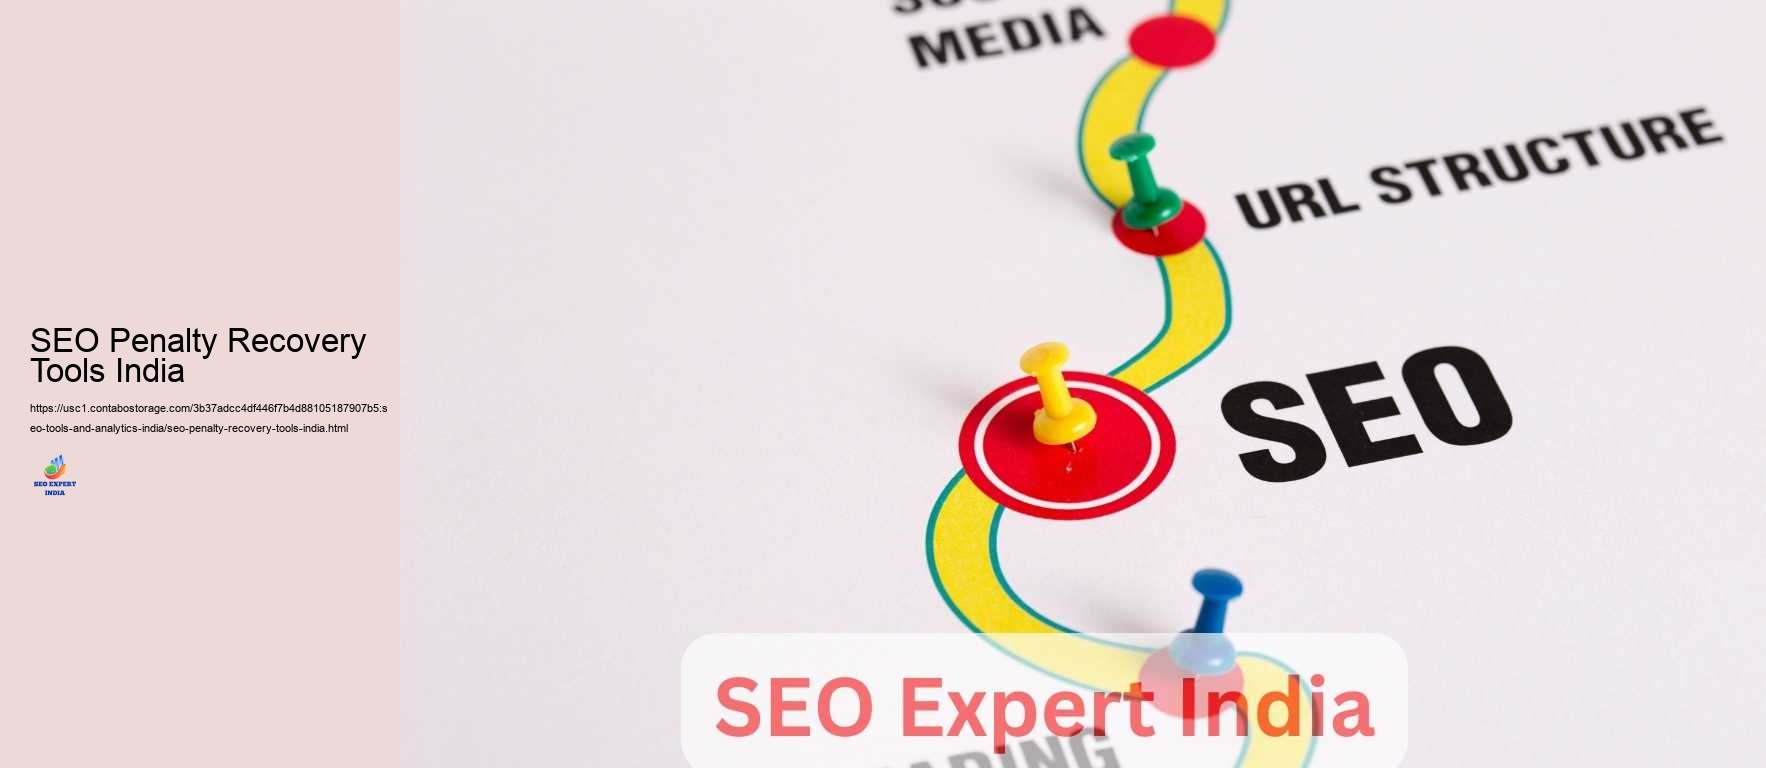 SEO Penalty Recovery Tools India